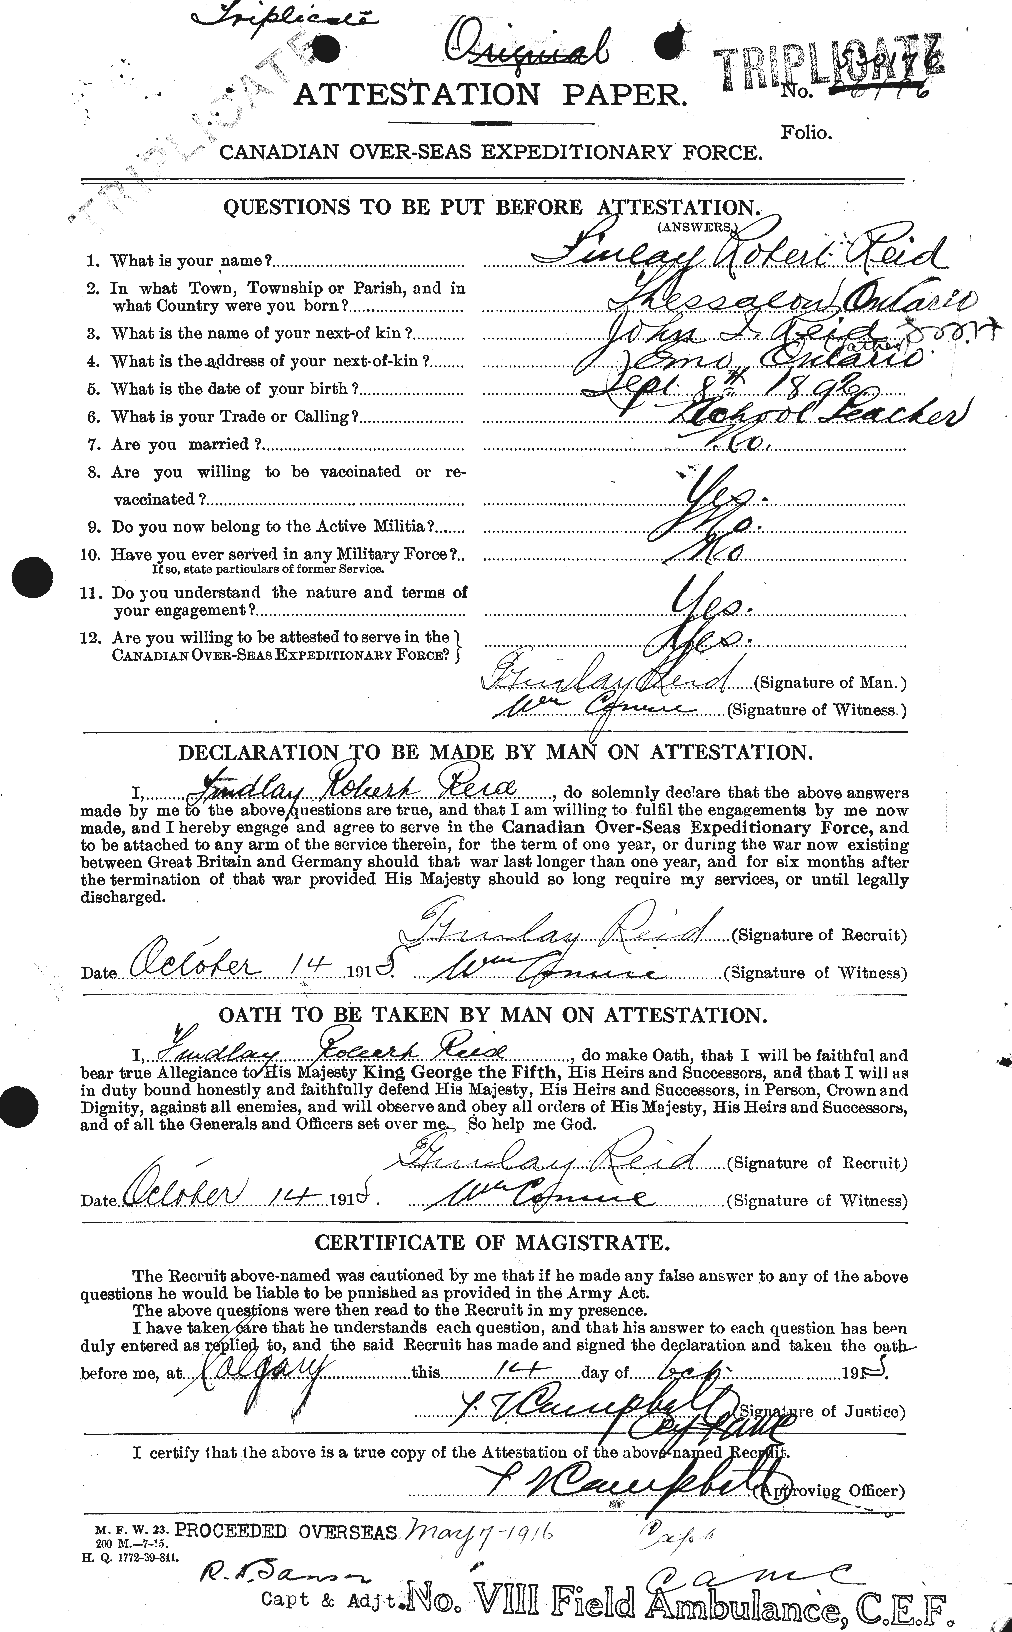 Personnel Records of the First World War - CEF 598033a